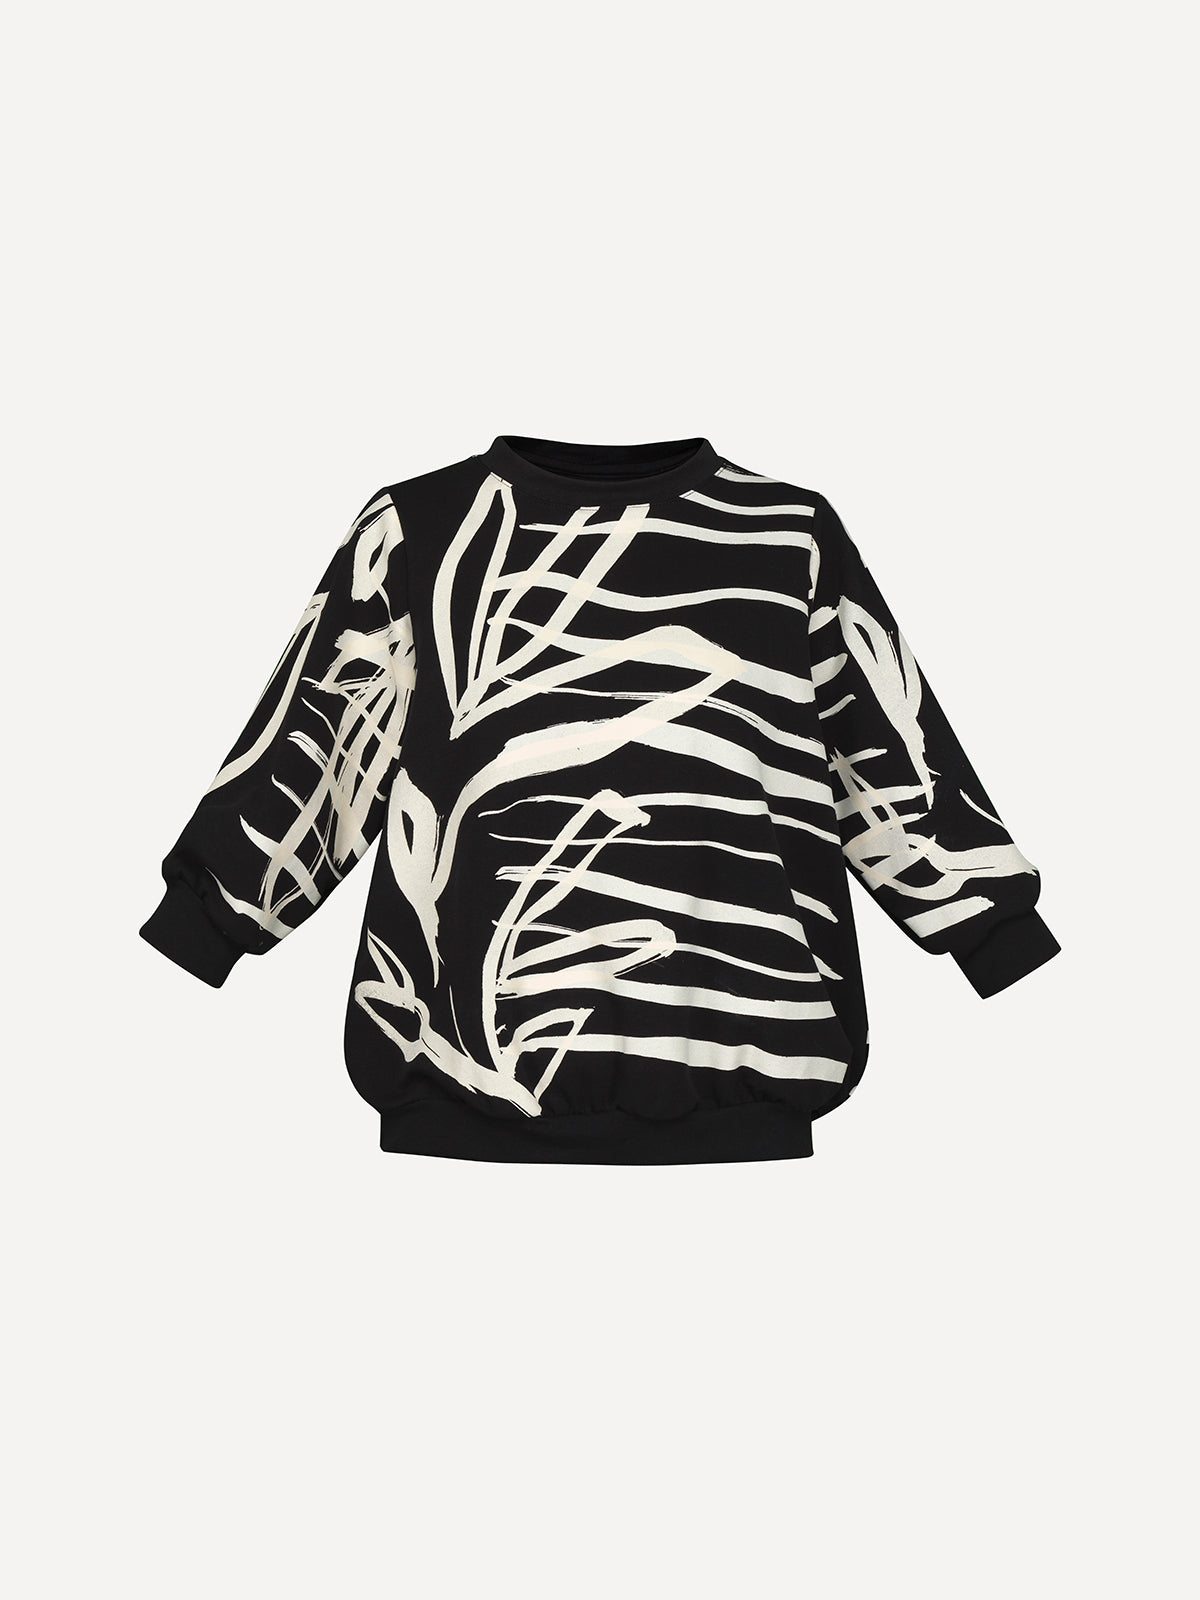 Herbs and stripes black women's oversized sweater